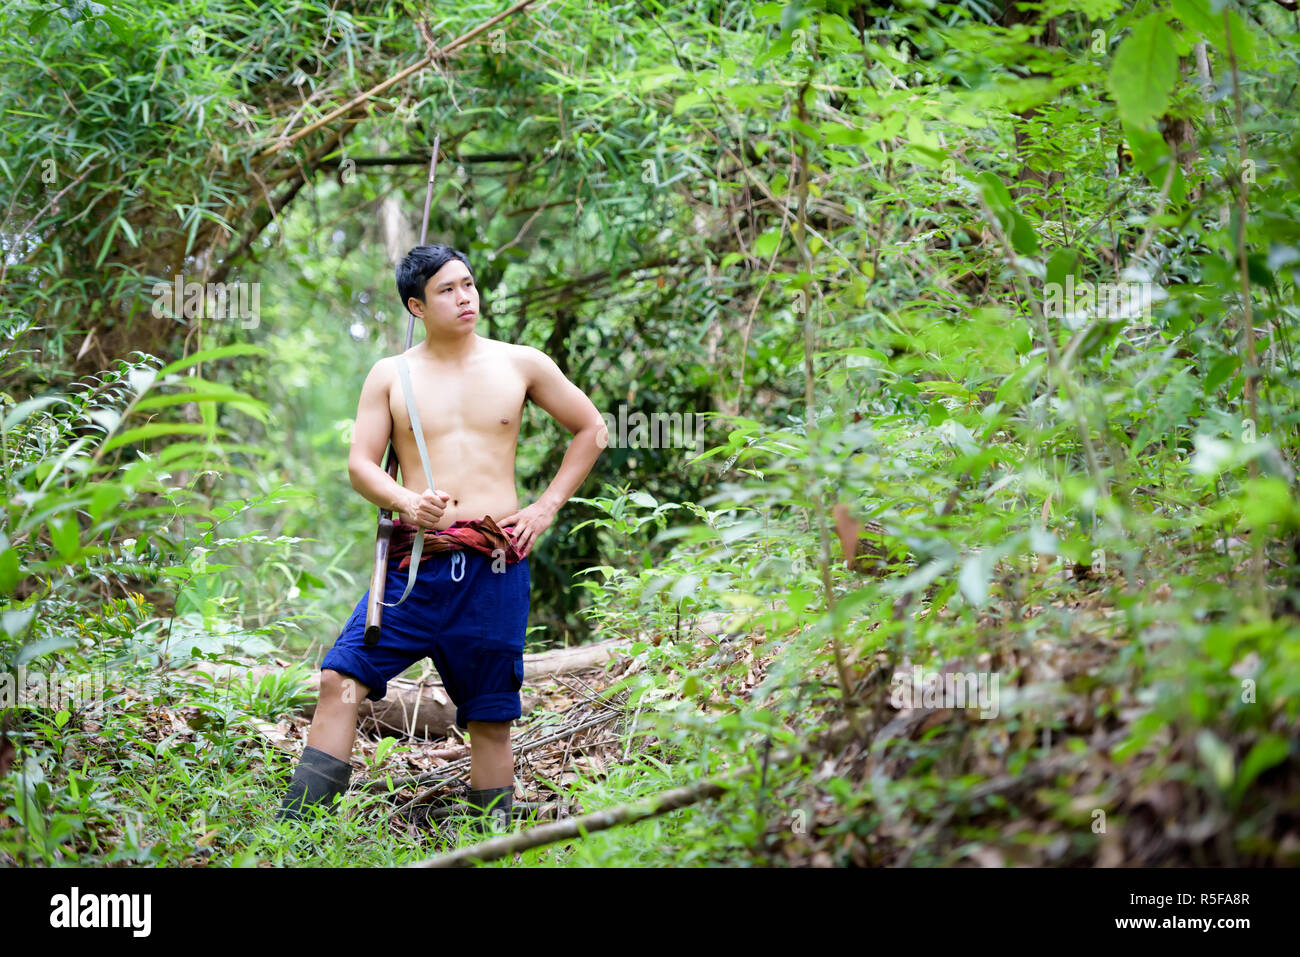 Asian man farmer carrying a rifle walks along in the forest background. Hunting and the way of life of rural people in Thailand concept. Stock Photo